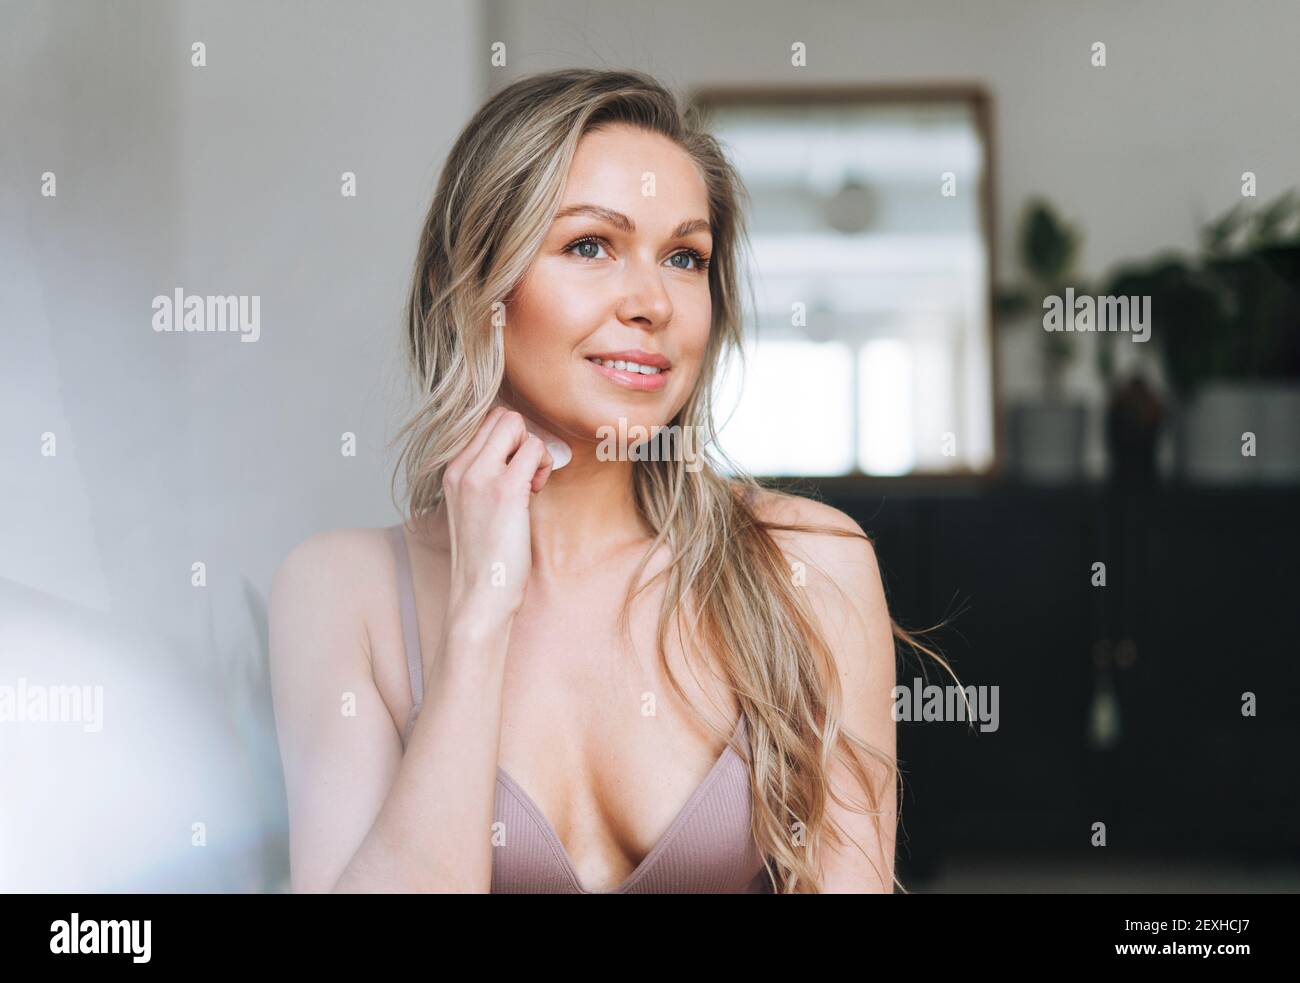 Blonde smiling woman 35 year plus clean fresh face and hands with long hair does facial massage with gouache scraper in underwear Stock Photo